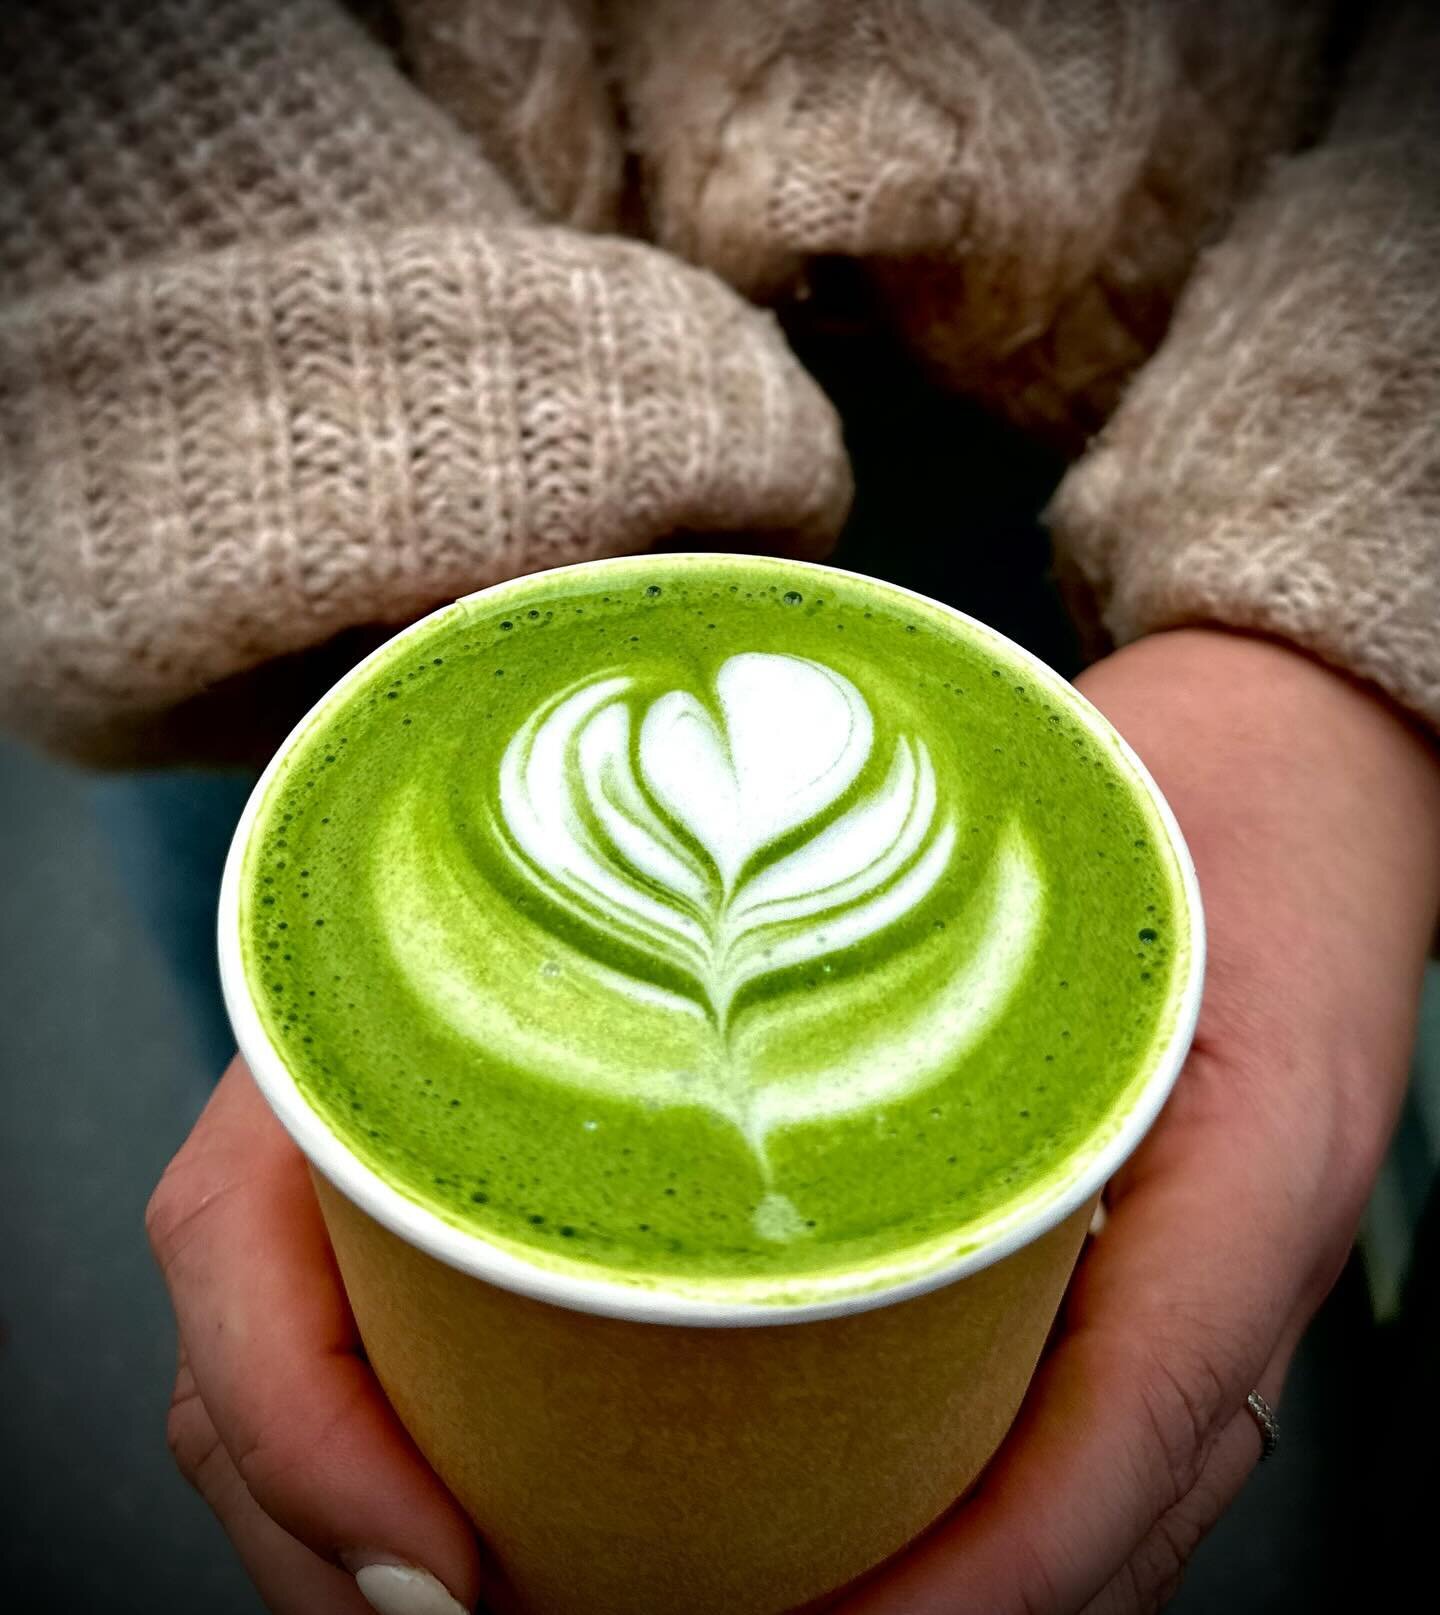 Experience the invigorating qualities of matcha &ndash; a revitalizing drink without the drawbacks of caffeine crashes. Rich in antioxidants, studies suggest it may aid in preventing chronic diseases. 

Explore our ceremonial grade matcha in a latte 